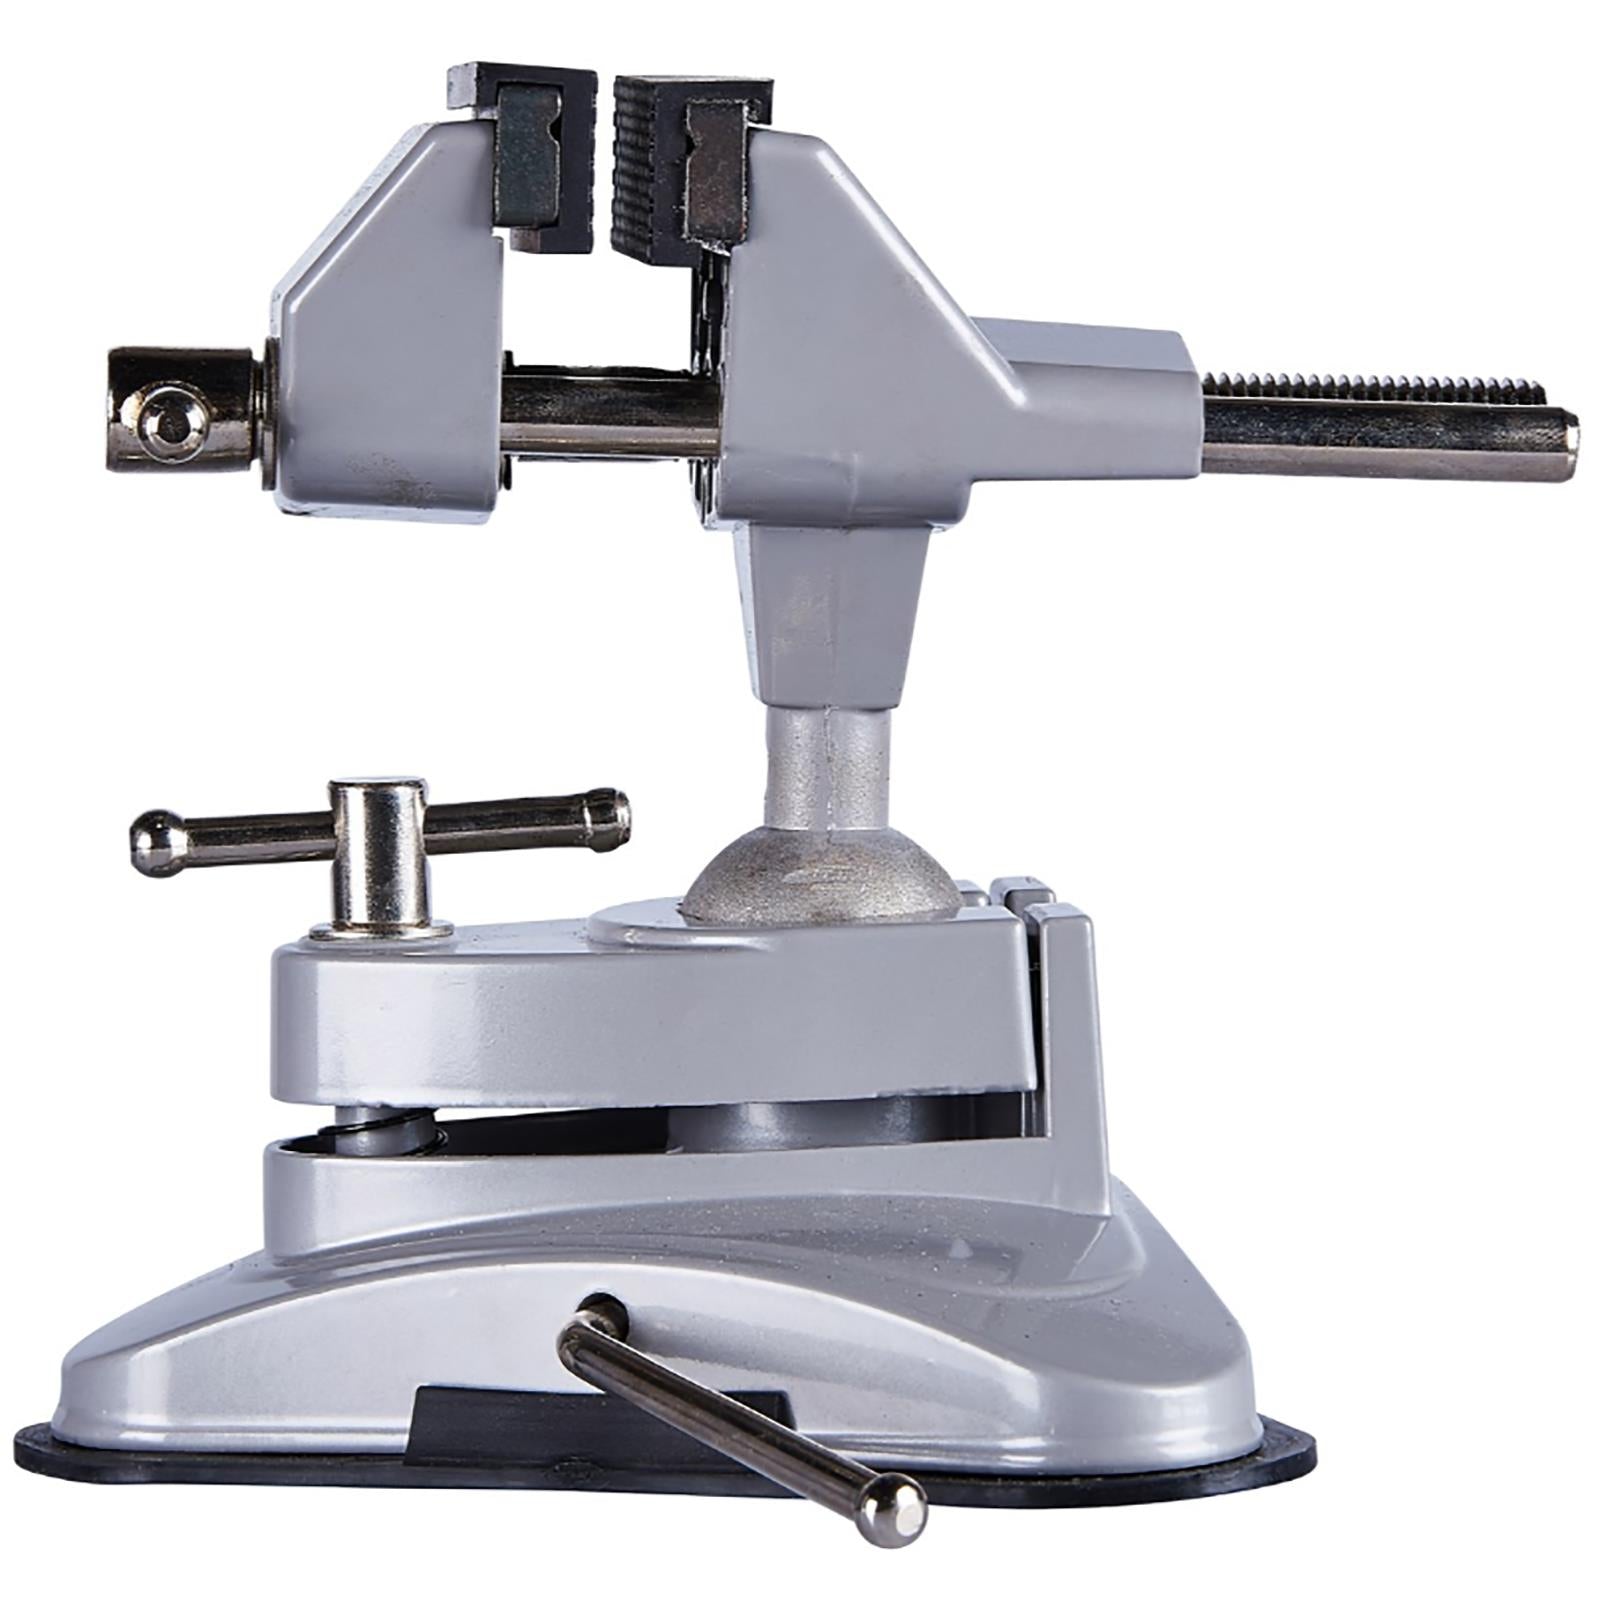 Amtech Bench Vice Clamp Table Suction Base Soft Jaws Rotating 70mm 2.75